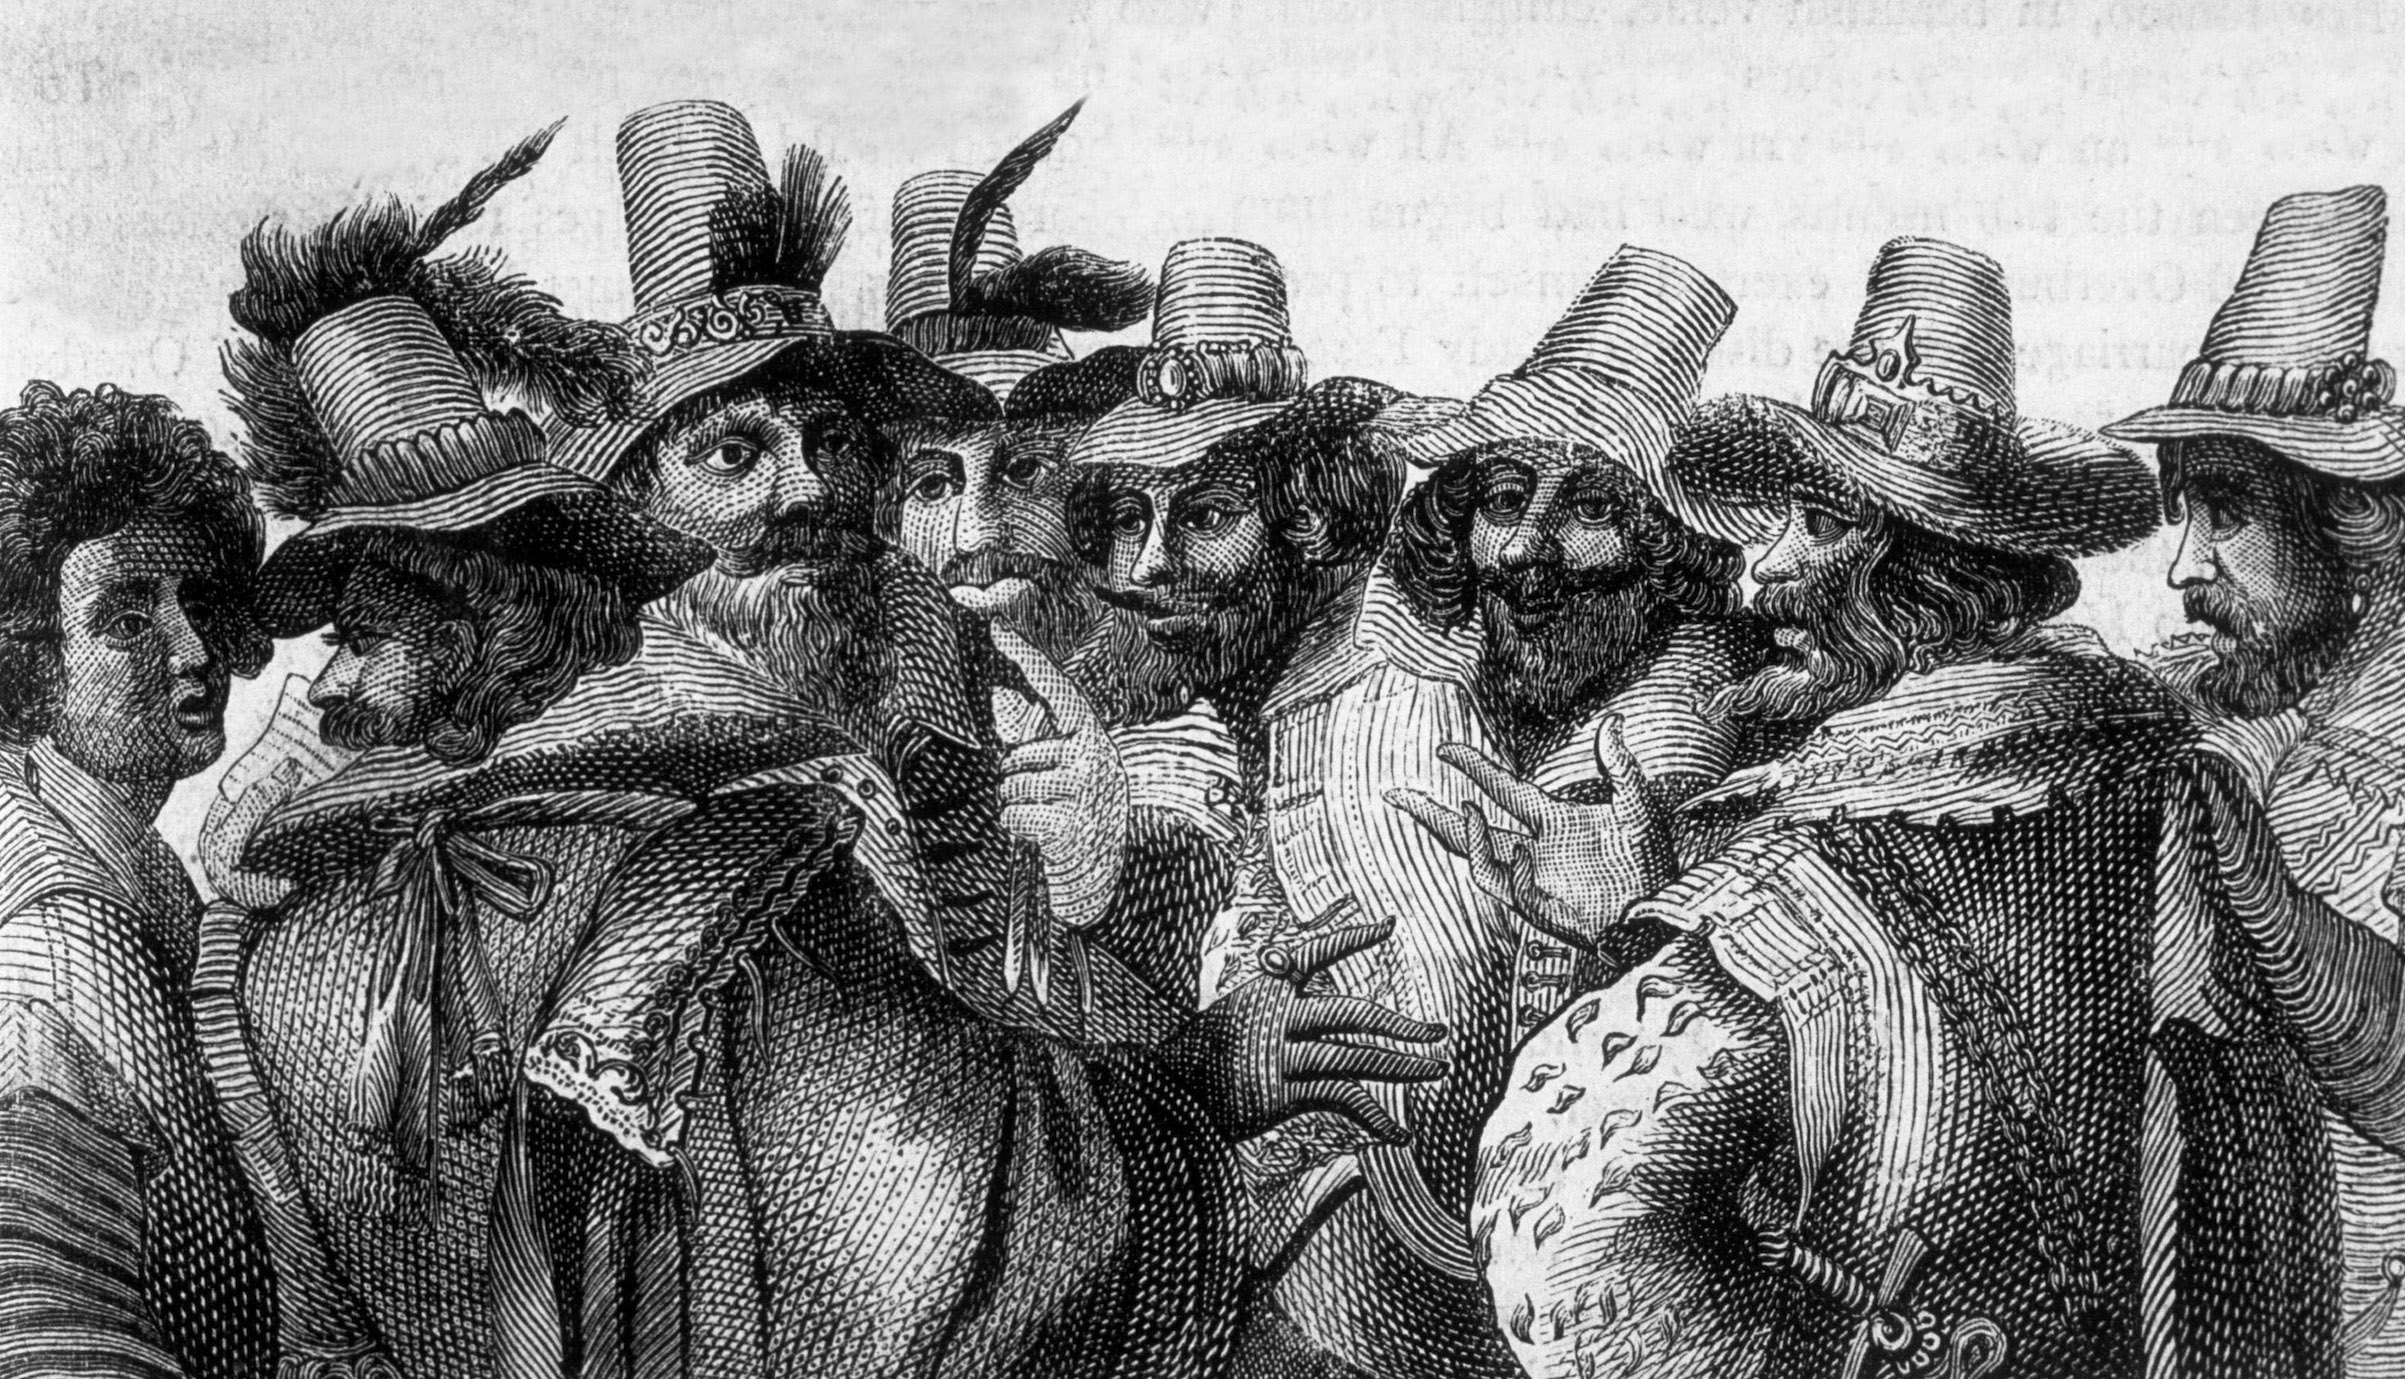 Engraving of Guy Fawkes and other Gunpowder plot conspirators, from OLD AND NEW LONDON (Vol. 1) by Walter Thornbury, 1897. (Time Life Pictures/The LIFE Picture Collection/Getty Images)